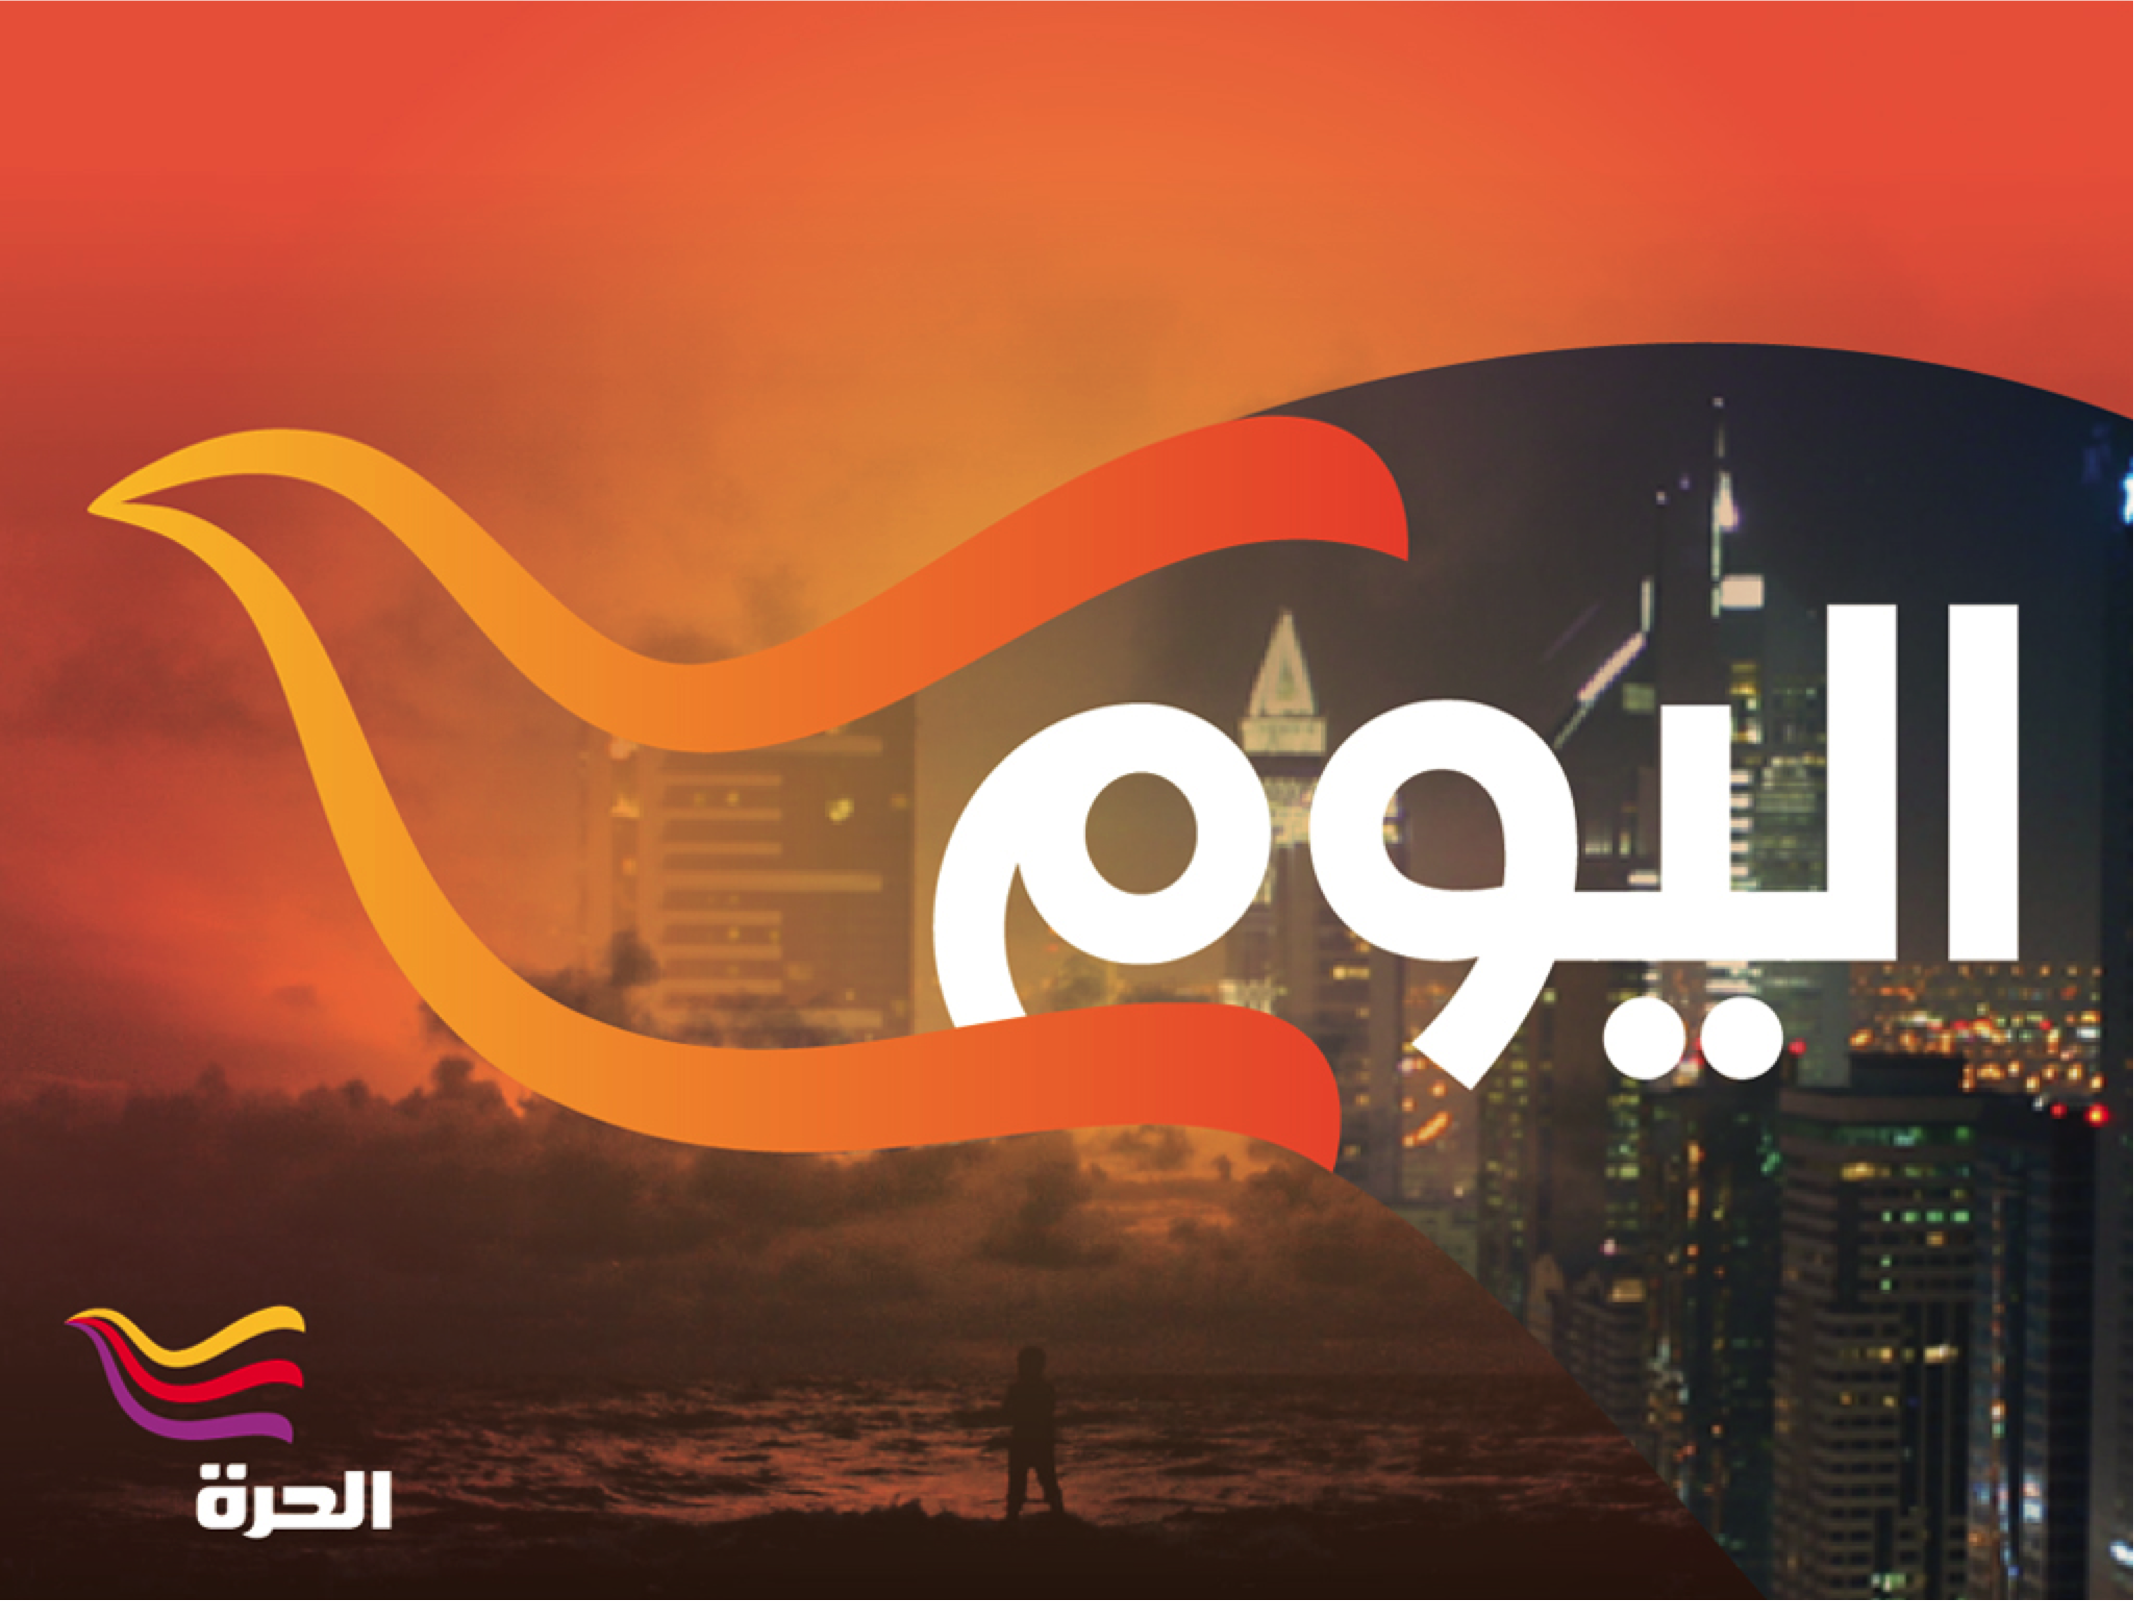 Project image 6 for Alhurra Network Identity, Alhurra TV Network